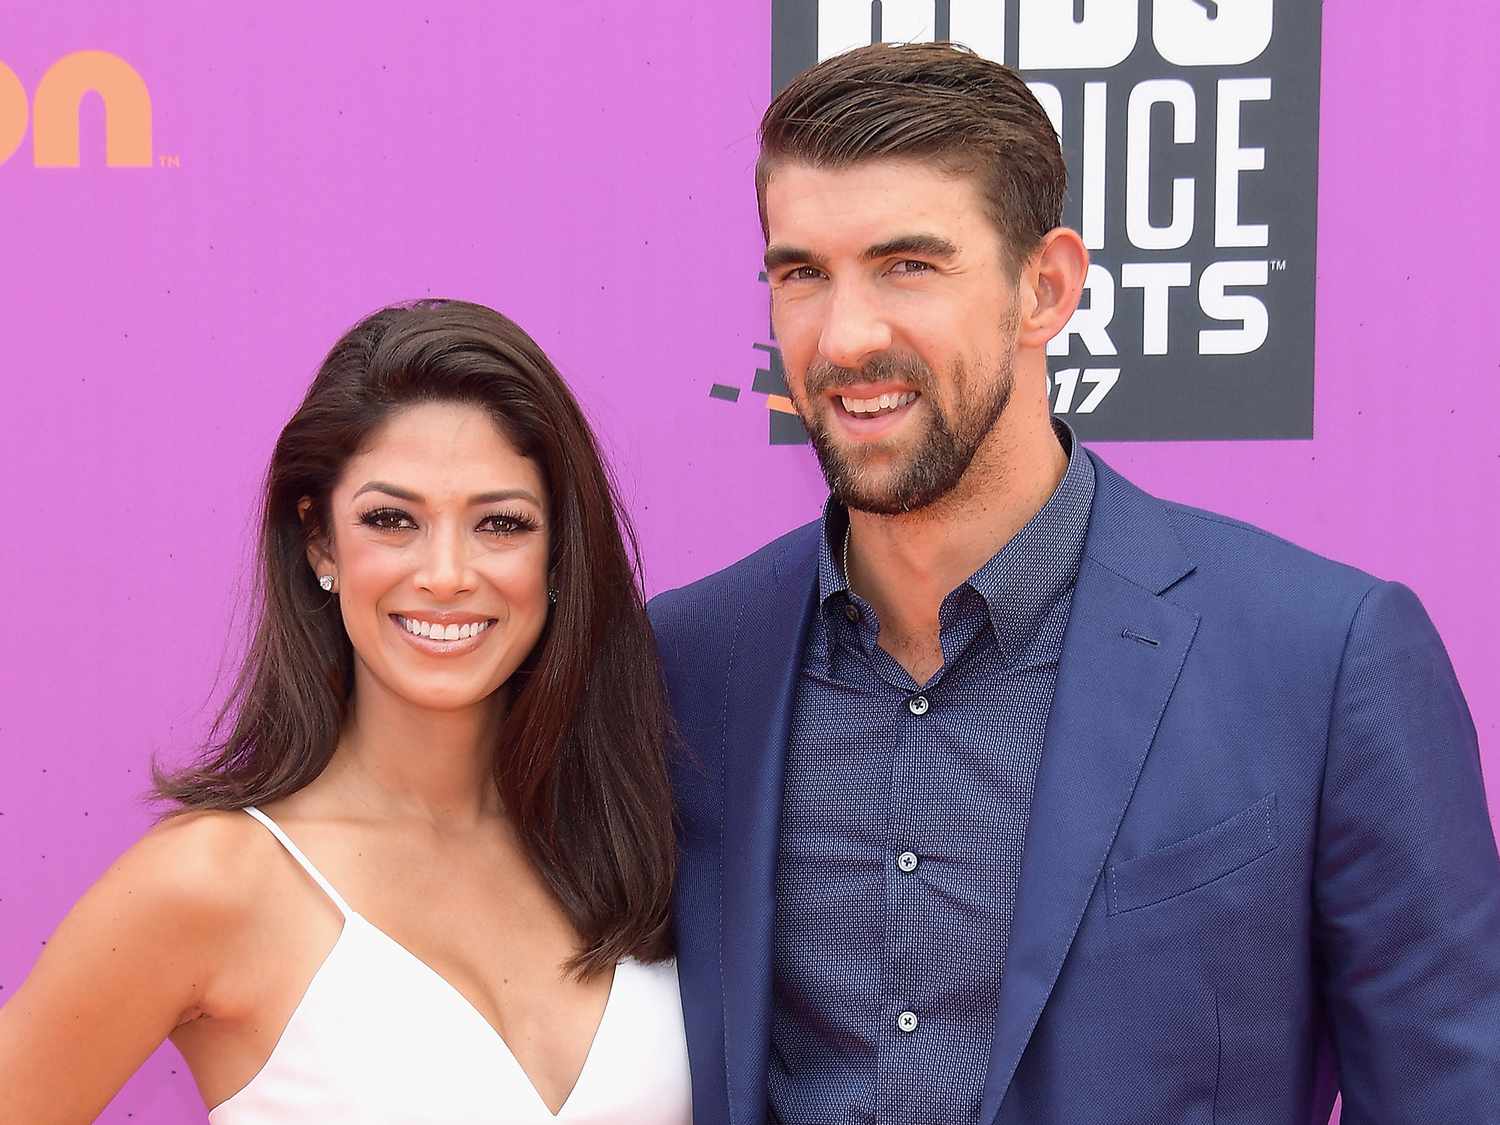 Michael Phelps and Wife Nicole Johnson Baby No. 4 CitizenSide